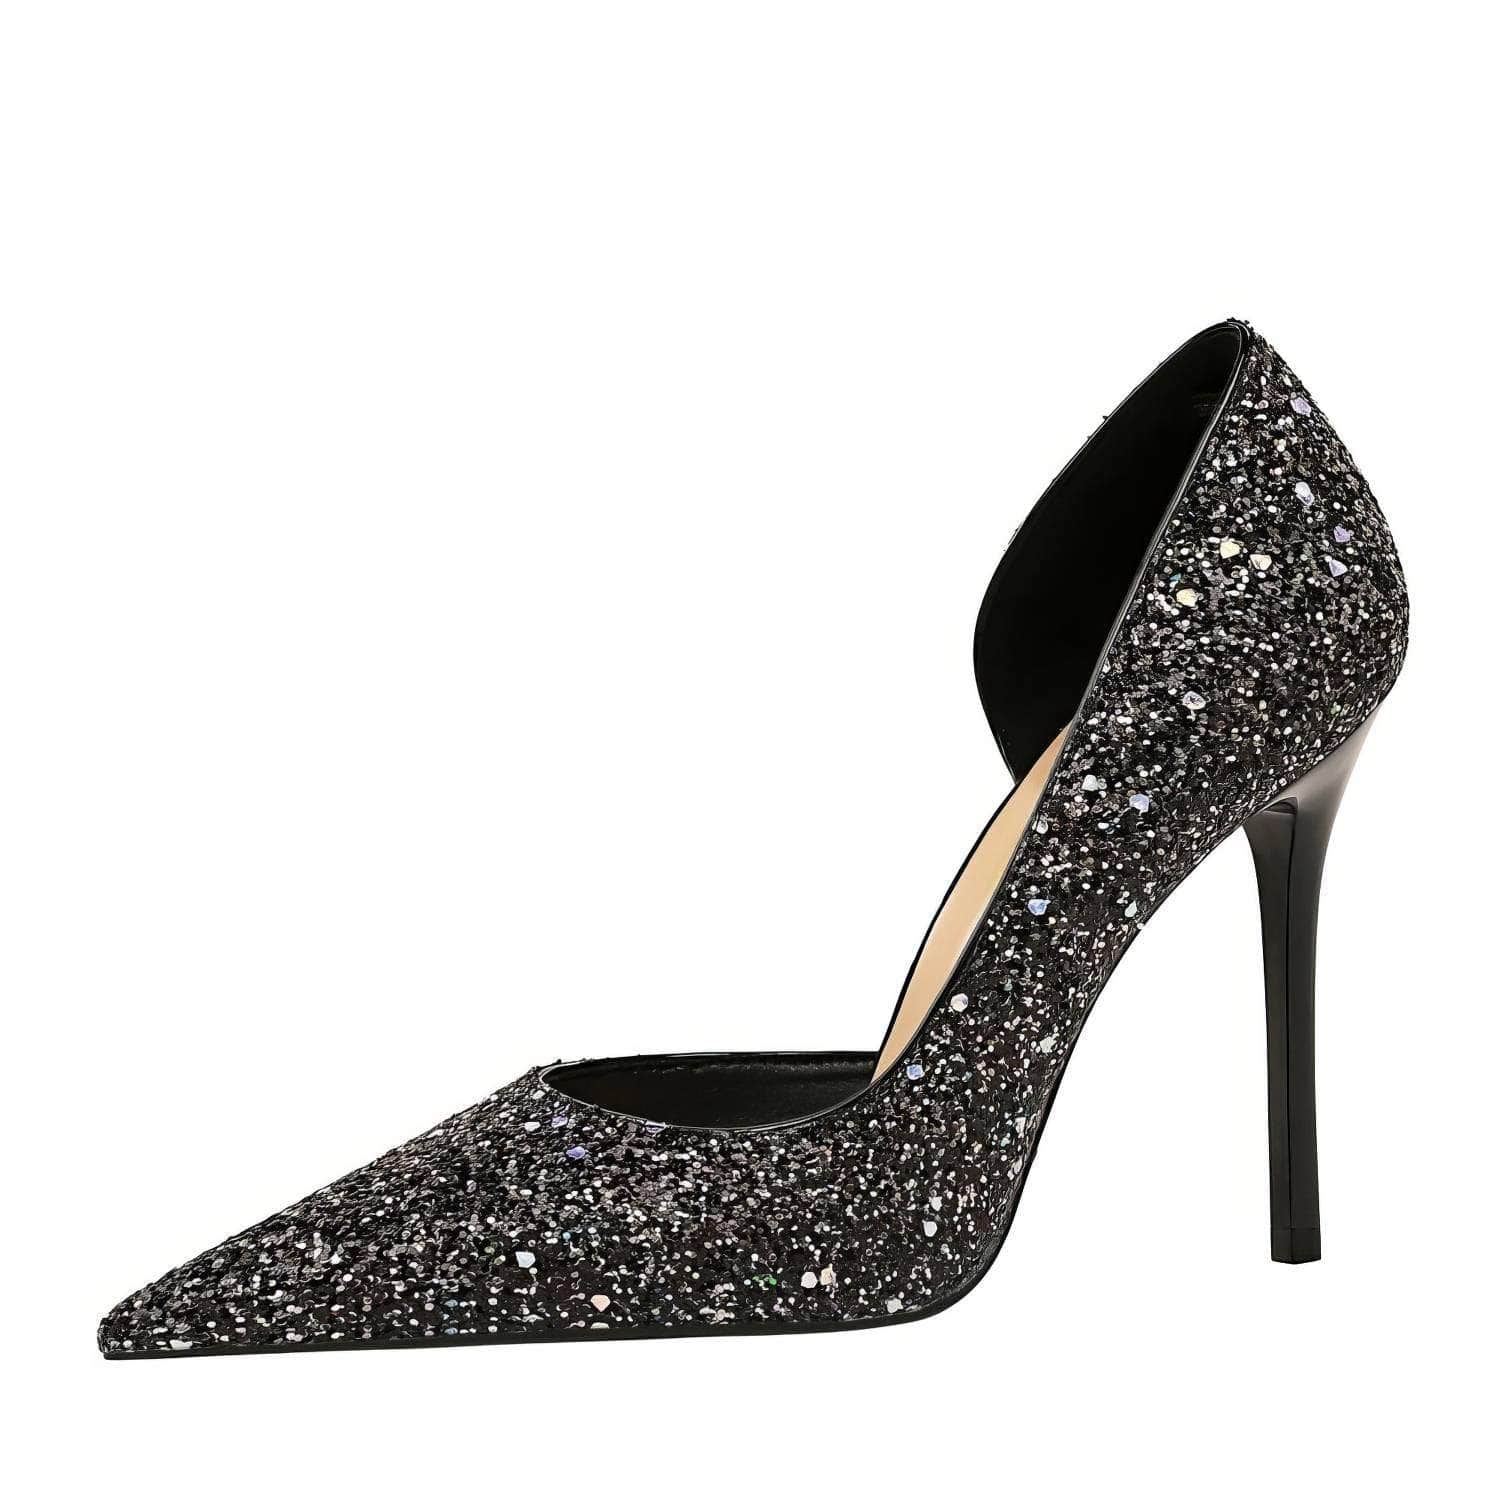 Bling Sequin Pointed Toes Heels Pumps